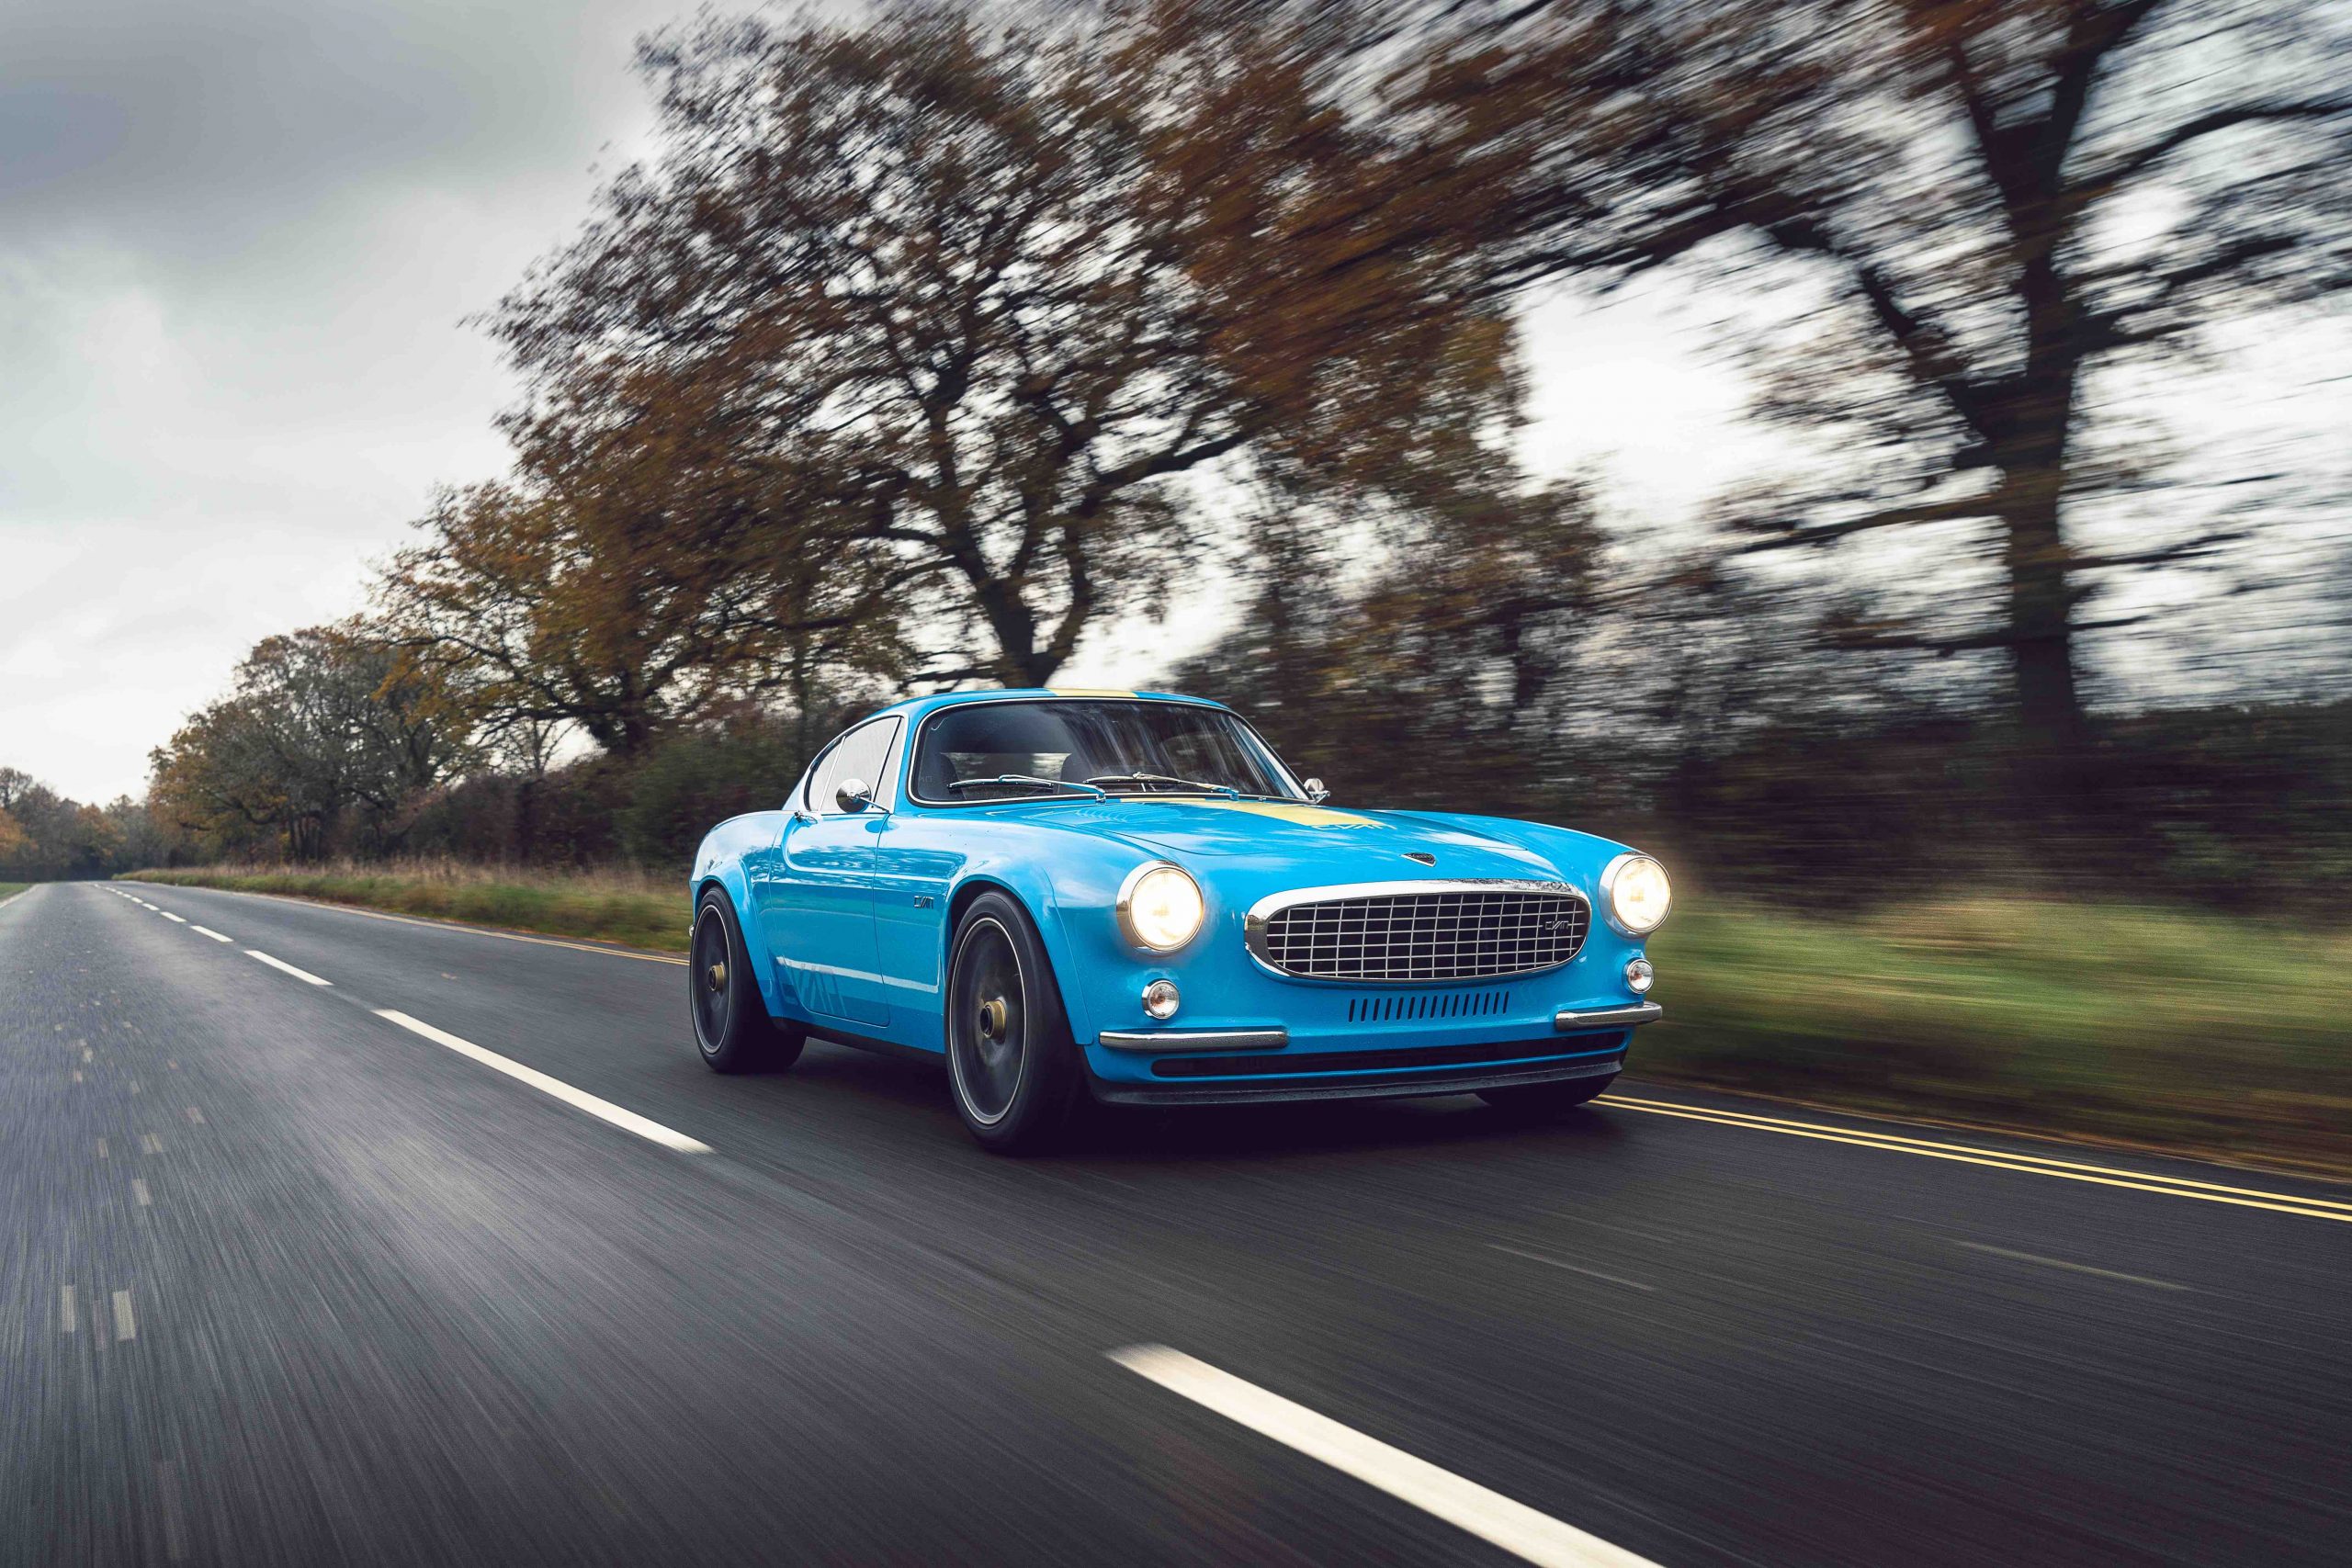 Volvo P1800 Cyan review: It doesn’t get much better than this